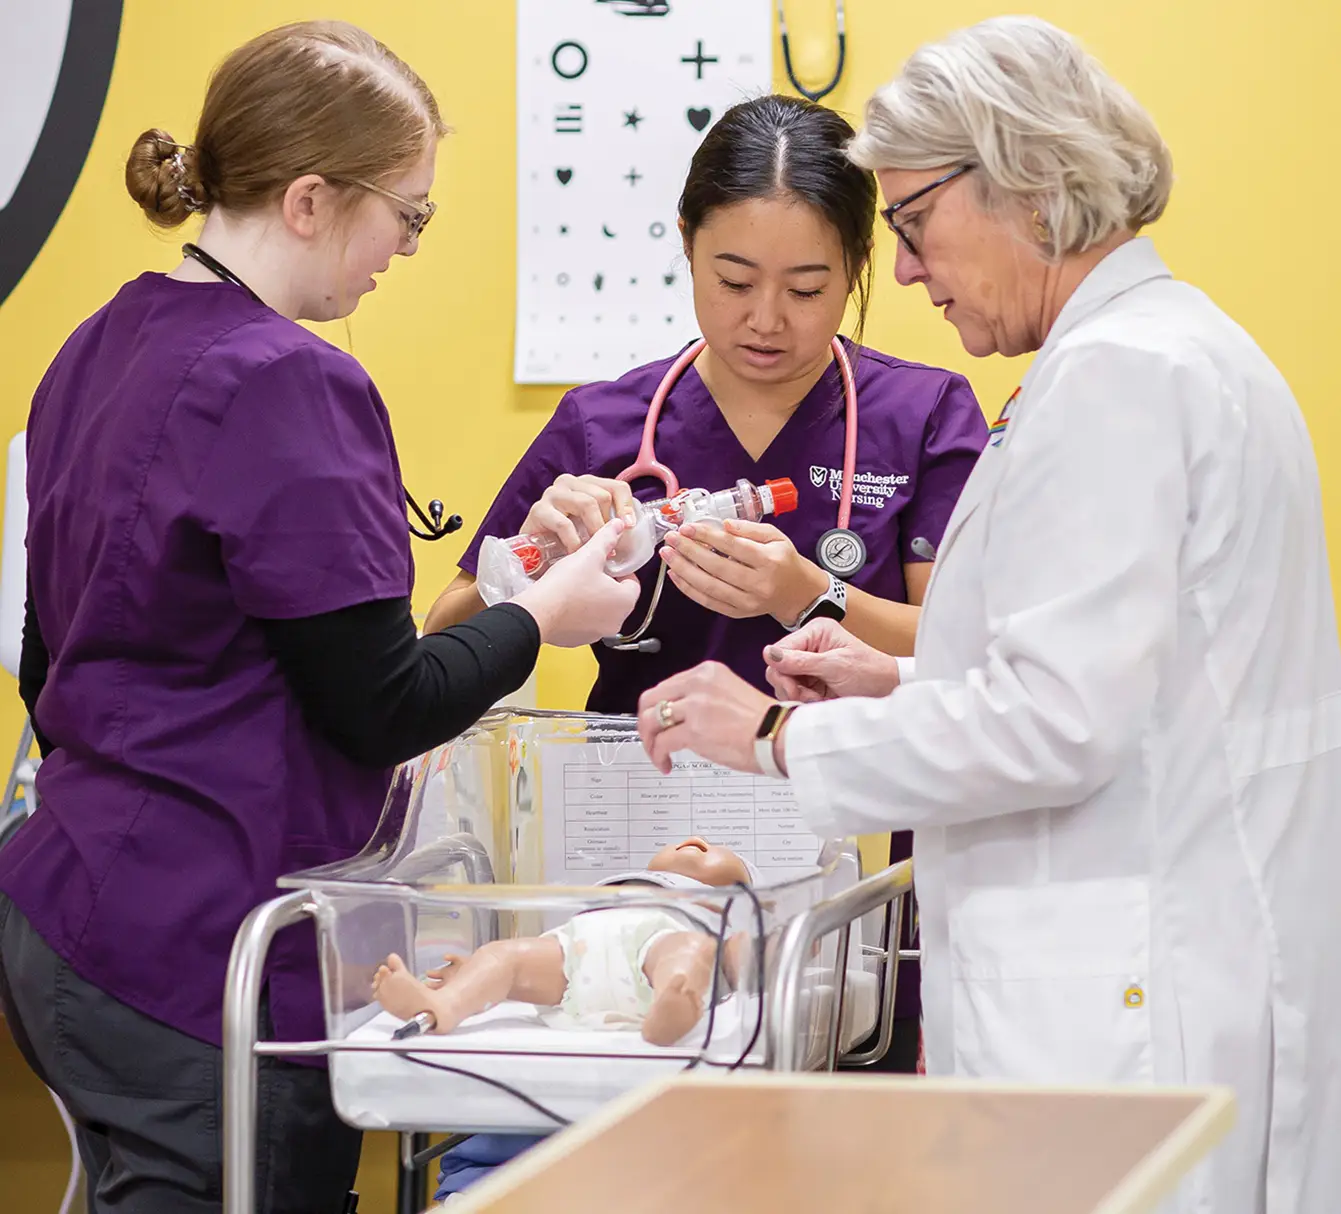 Two nursing students and an instructor standing over hospital bassinet with toy baby in it